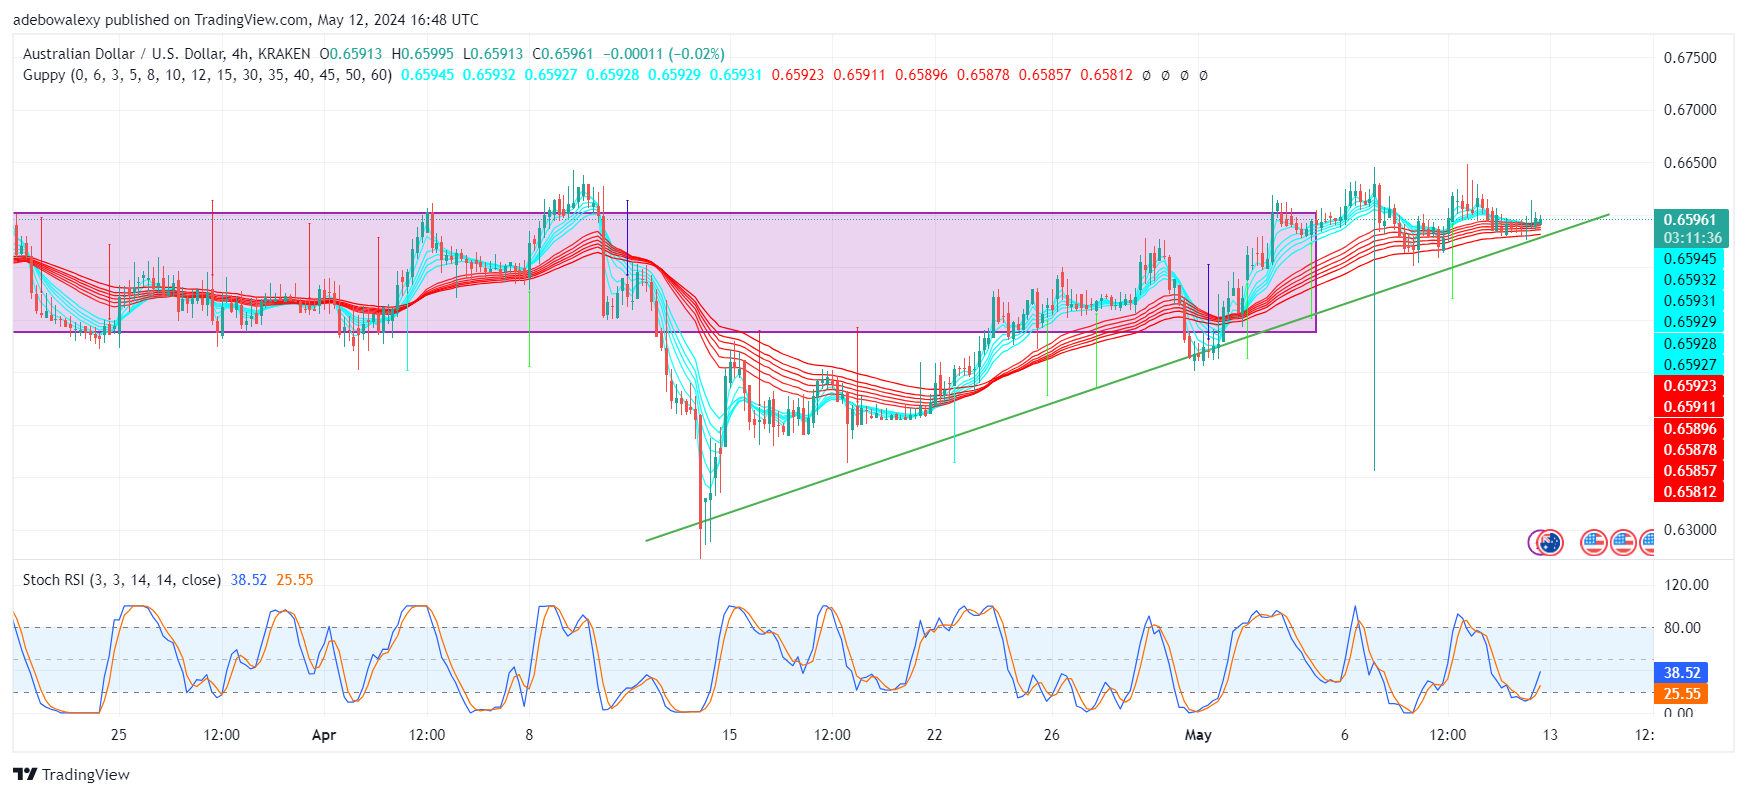 AUDUSD May Break the Barrier at the 0.6600 Price Level